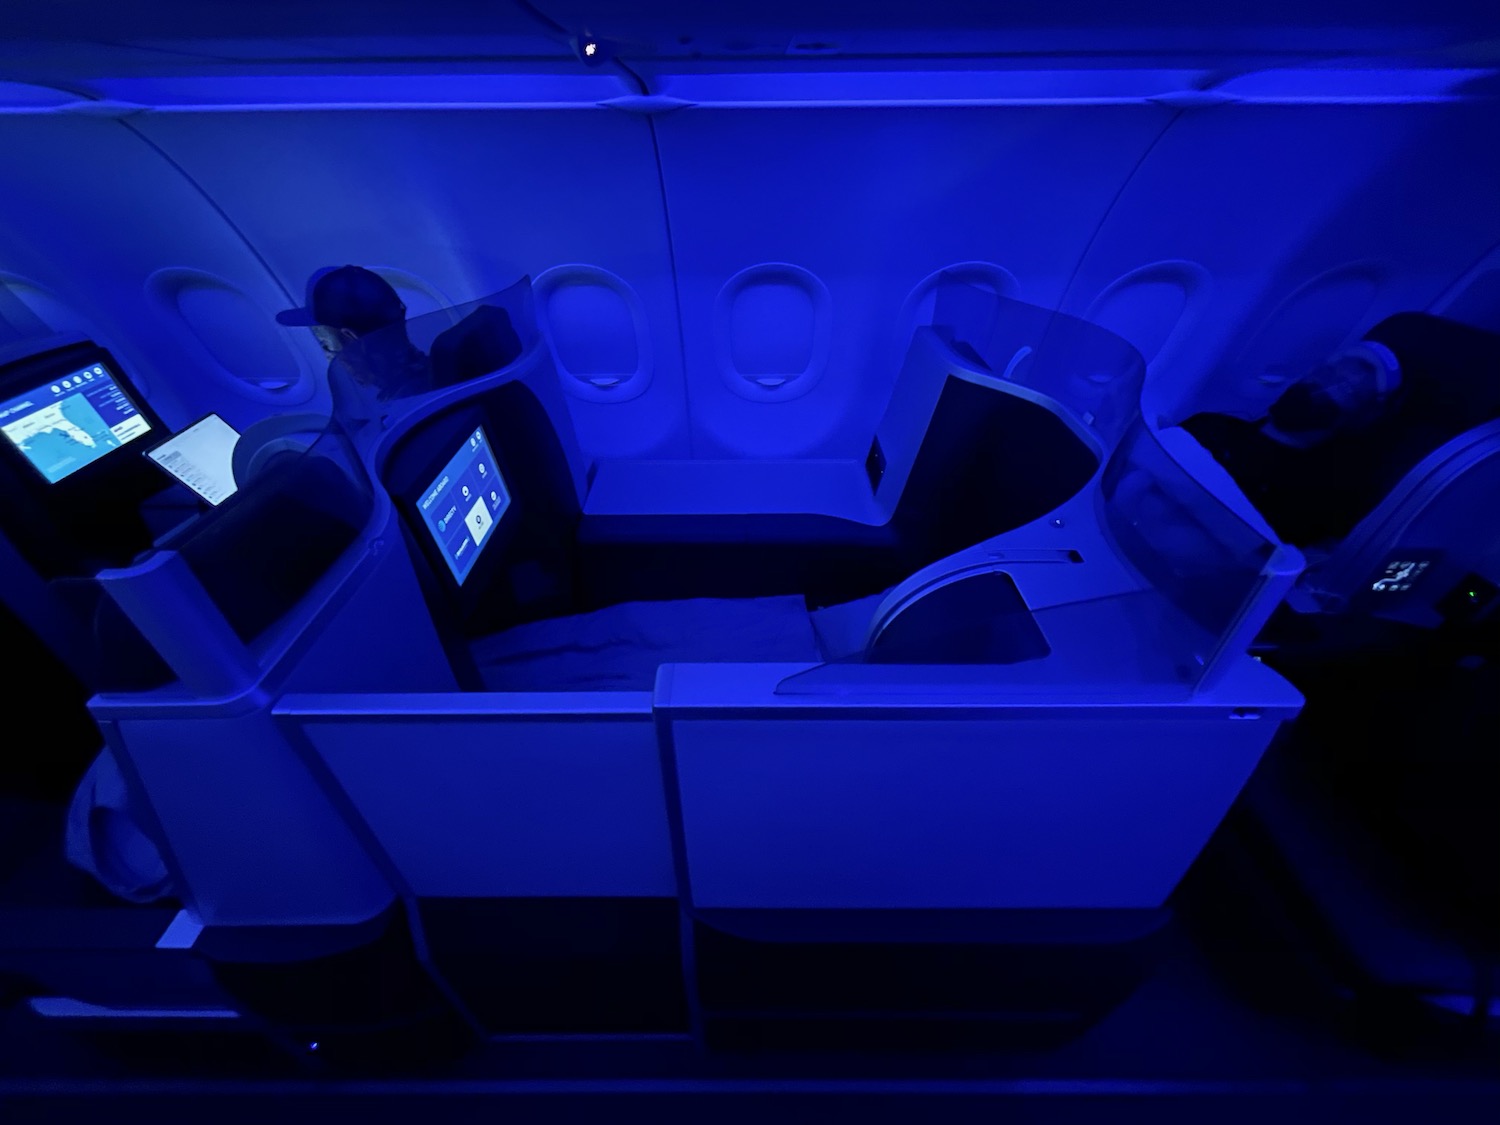 a person sitting in a chair in a blue lit room